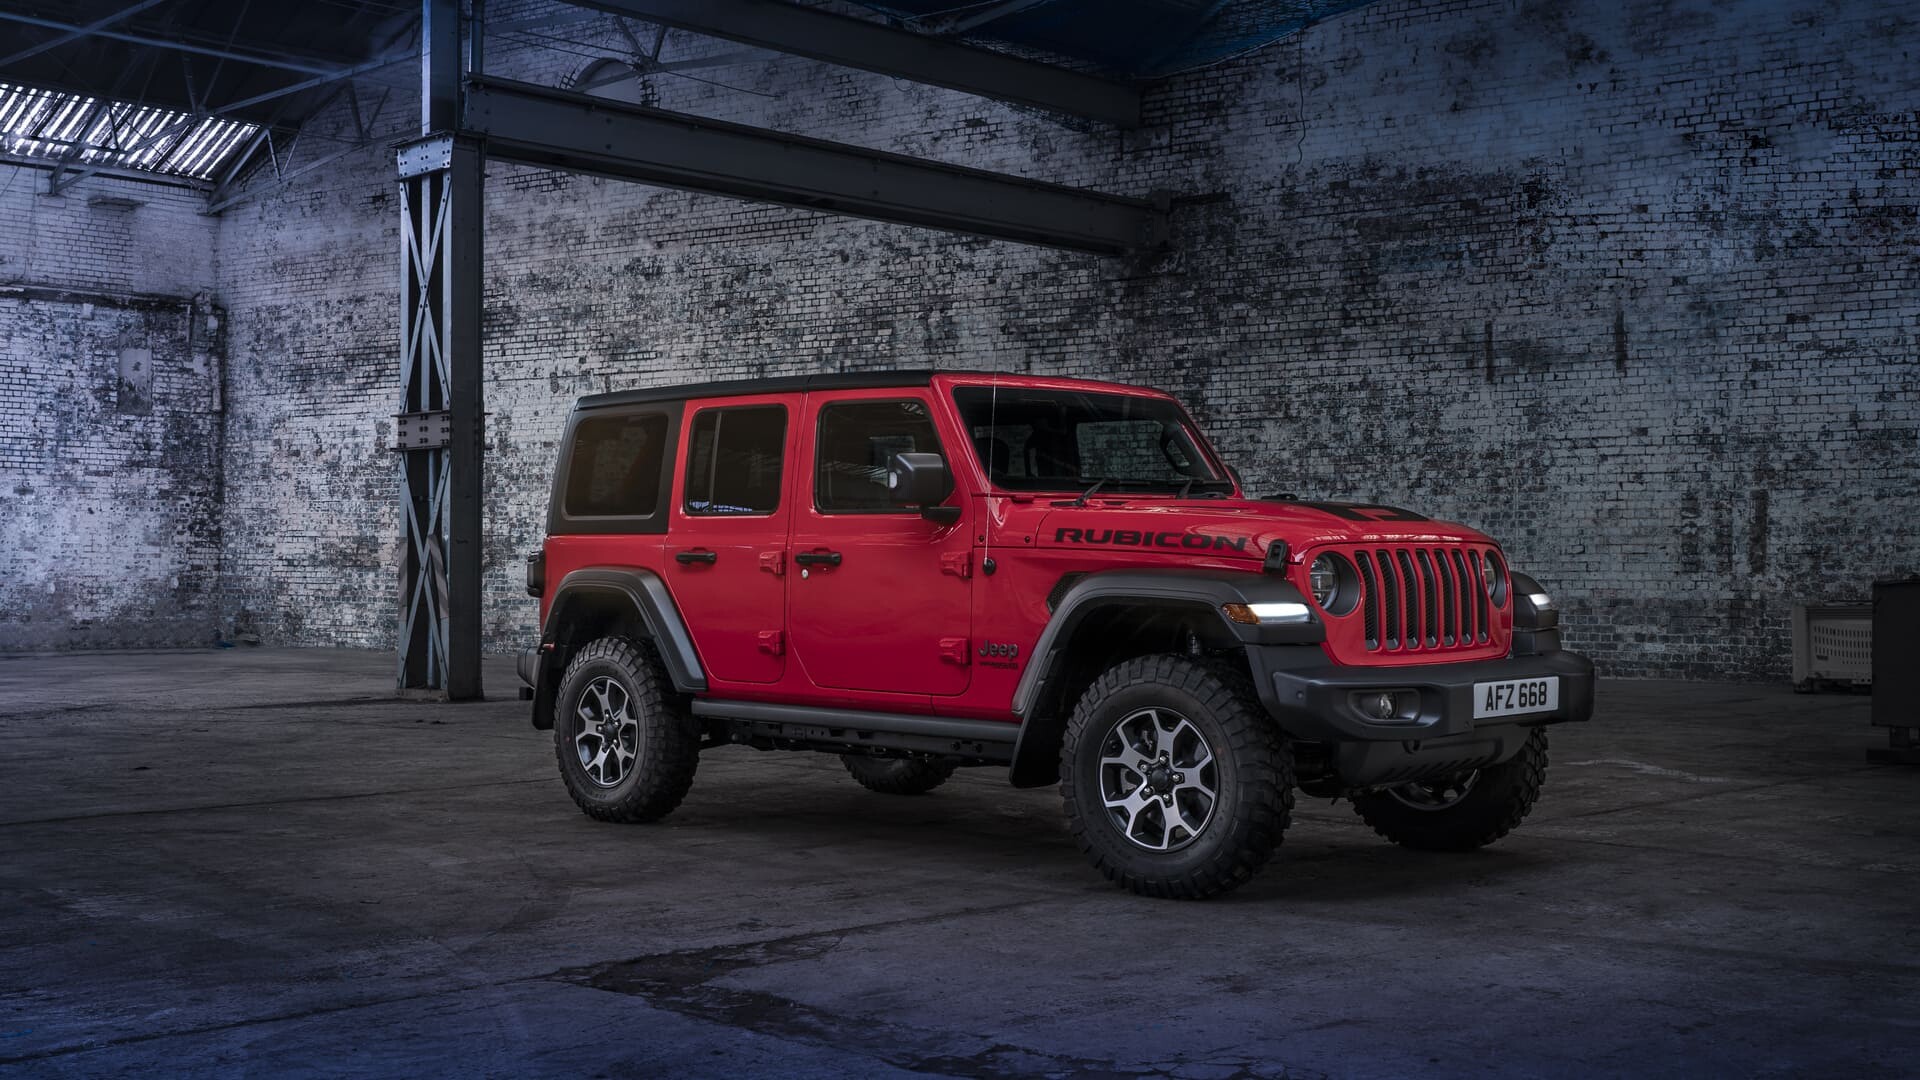 Jeep: A carmaking company that deals in the production and sale of premium SUVs. 1920x1080 Full HD Background.